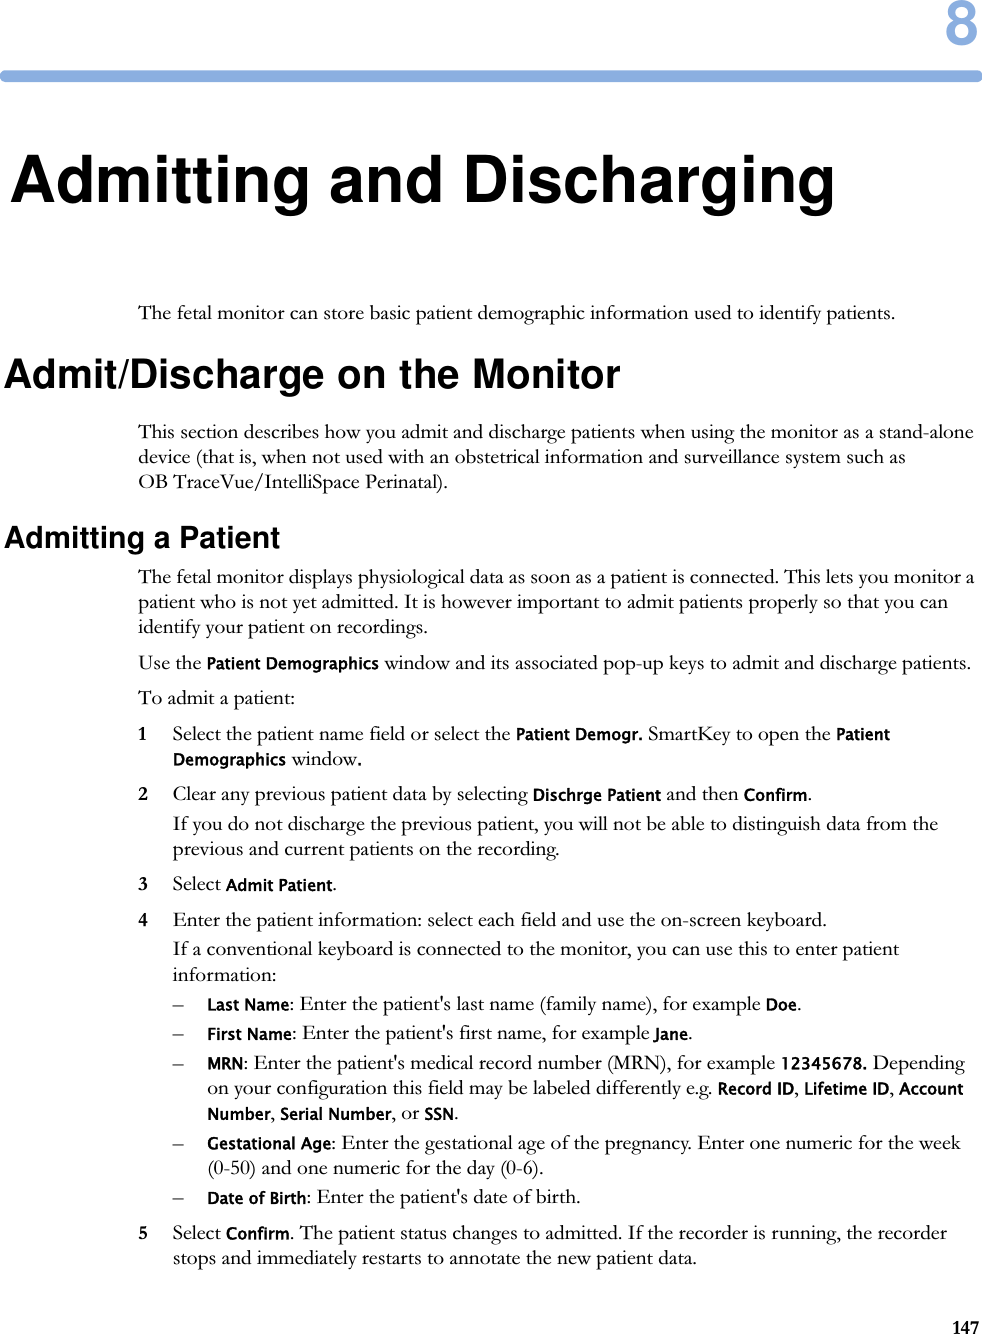 81478Admitting and DischargingThe fetal monitor can store basic patient demographic information used to identify patients.Admit/Discharge on the MonitorThis section describes how you admit and discharge patients when using the monitor as a stand-alone device (that is, when not used with an obstetrical information and surveillance system such as OB TraceVue/IntelliSpace Perinatal).Admitting a PatientThe fetal monitor displays physiological data as soon as a patient is connected. This lets you monitor a patient who is not yet admitted. It is however important to admit patients properly so that you can identify your patient on recordings.Use the Patient Demographics window and its associated pop-up keys to admit and discharge patients.To admit a patient:1Select the patient name field or select the Patient Demogr. SmartKey to open the Patient Demographics window.2Clear any previous patient data by selecting Dischrge Patient and then Confirm.If you do not discharge the previous patient, you will not be able to distinguish data from the previous and current patients on the recording.3Select Admit Patient.4Enter the patient information: select each field and use the on-screen keyboard.If a conventional keyboard is connected to the monitor, you can use this to enter patient information:–Last Name: Enter the patient&apos;s last name (family name), for example Doe.–First Name: Enter the patient&apos;s first name, for example Jane.–MRN: Enter the patient&apos;s medical record number (MRN), for example 12345678. Depending on your configuration this field may be labeled differently e.g. Record ID, Lifetime ID, Account Number, Serial Number, or SSN.–Gestational Age: Enter the gestational age of the pregnancy. Enter one numeric for the week (0-50) and one numeric for the day (0-6).–Date of Birth: Enter the patient&apos;s date of birth.5Select Confirm. The patient status changes to admitted. If the recorder is running, the recorder stops and immediately restarts to annotate the new patient data.